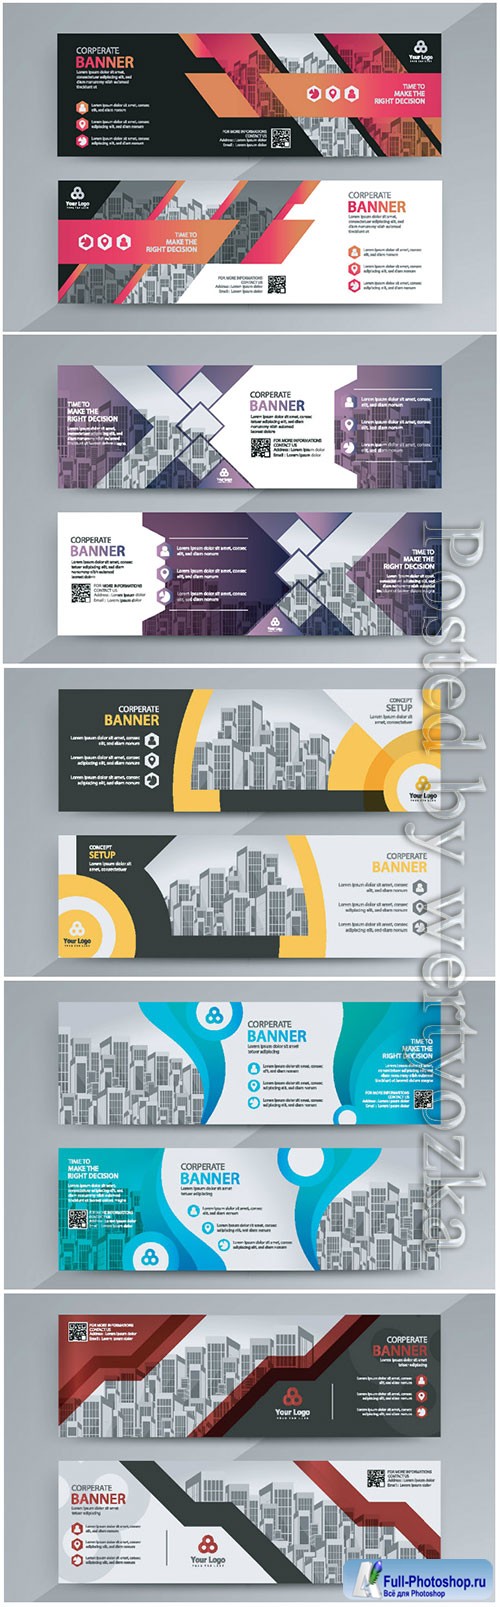 Horizontal advertising business banner layout template 